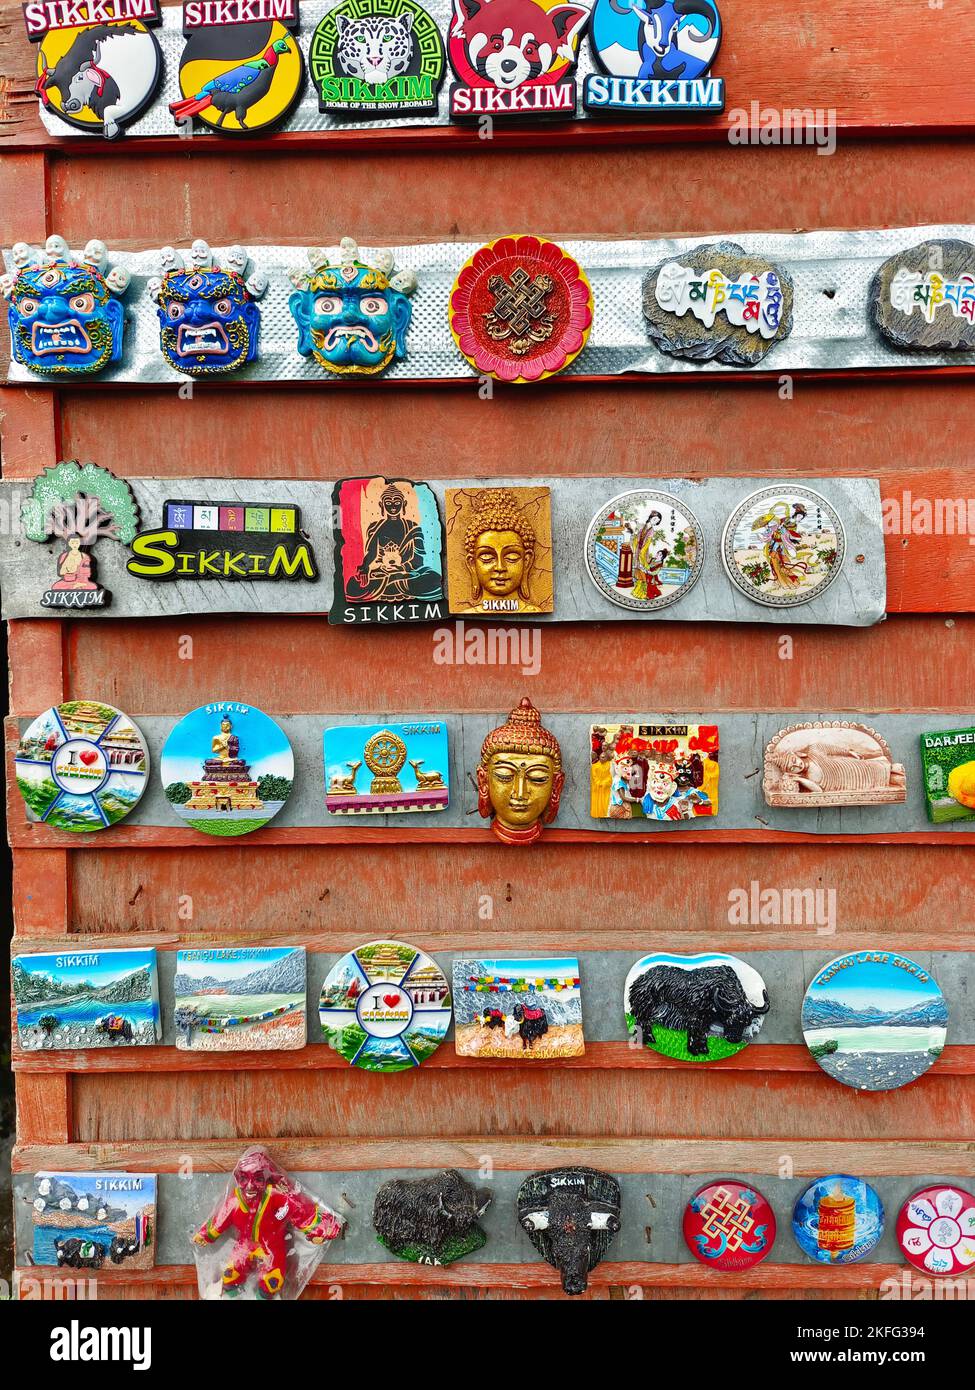 artisanal crafts and fridge magnets for sale at street Indian market in Sikkim, India Stock Photo